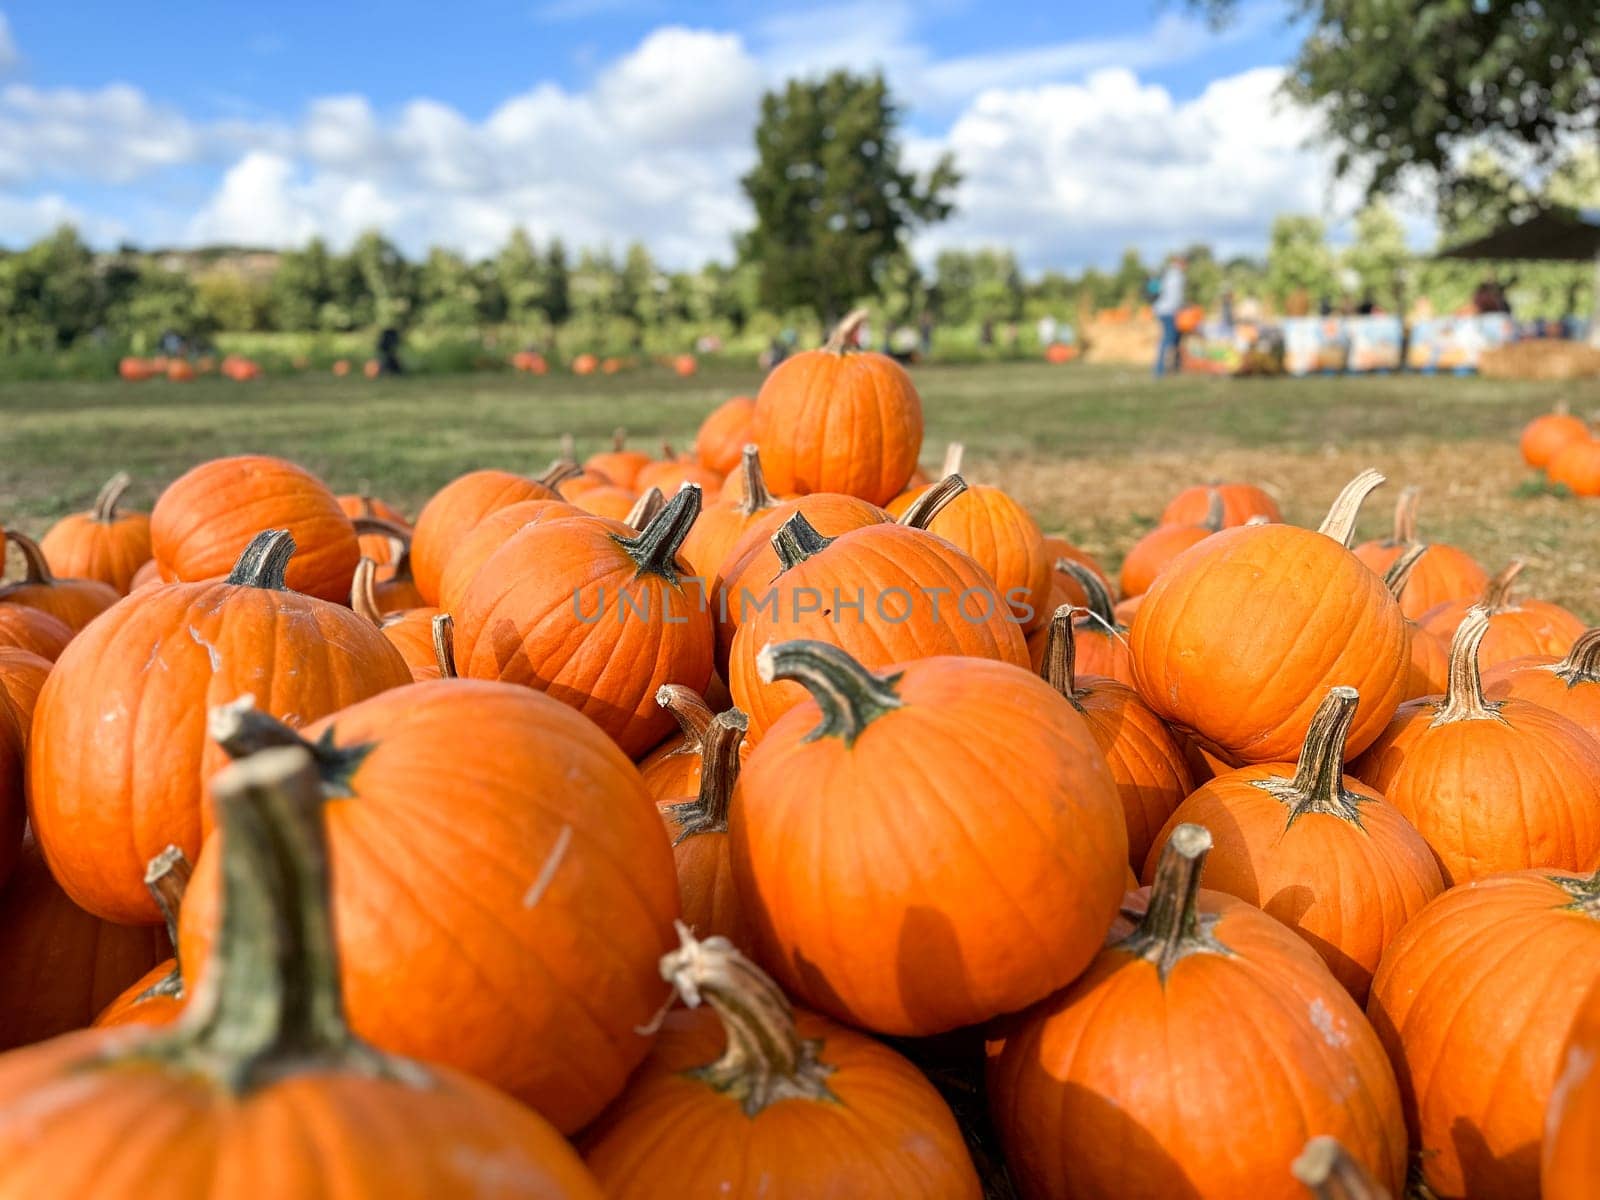 Pumpkins stalks in the field during harvest time in fall. Halloween preparation, American Farm